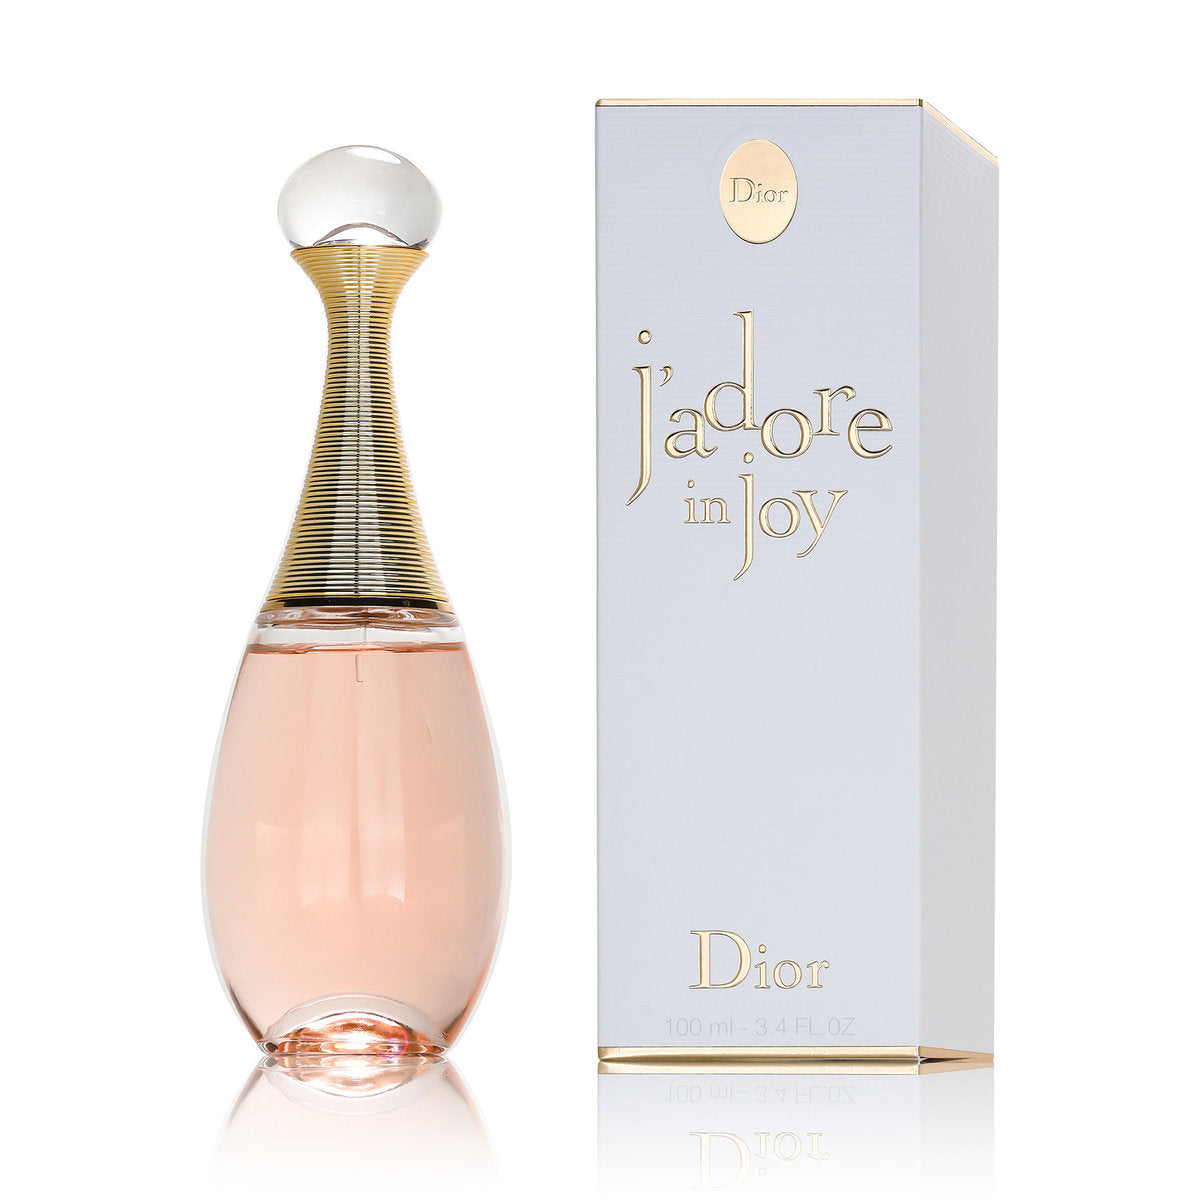 Jadore In Joy Perfume by Christian Dior, Released in 2017, J’Adore in Joy is part of the J’Adore fragrance collection. Developed in celebration of joy and the love of life. This salty floral treat opens with salt’s savory notes which offers an intriguing effect of the overall scent. It provides a pleasing balance to the heart tones of rich, banana-accented ylang-ylang essence and the rejuvenating, intense aroma of jasmine sambac. Neroli brightens the scent with hints of honey blossom and a touch of bitter orange. Base notes of ripe peach deliver a luscious, sensual conclusion to this enduring scent.